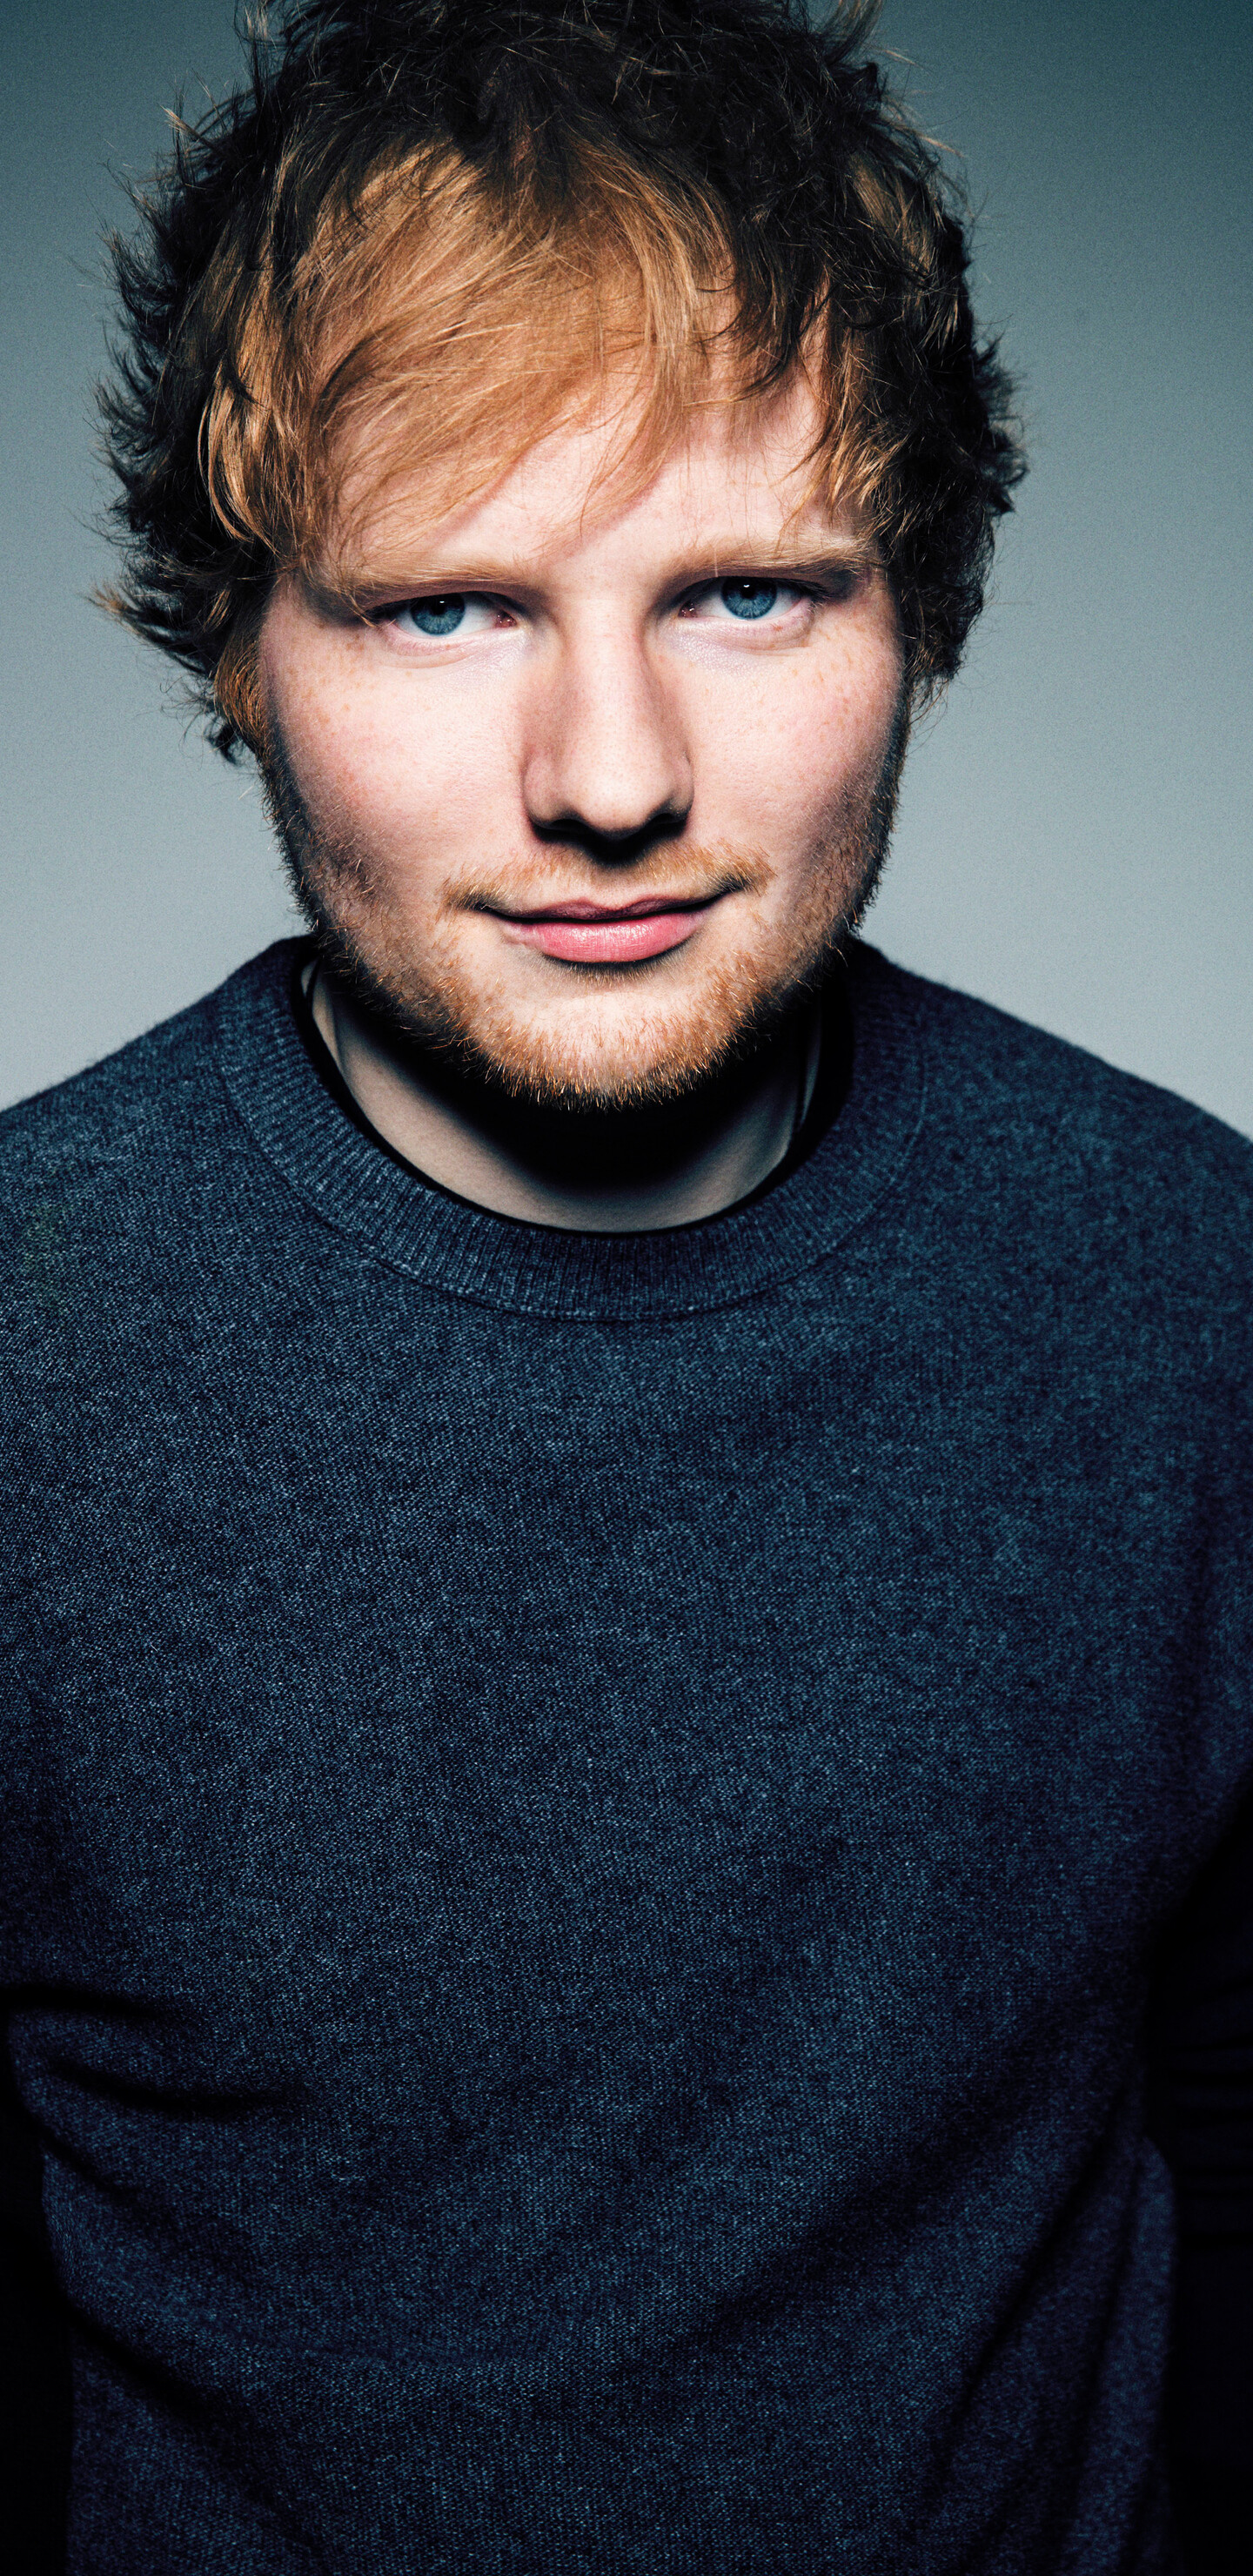 Ed Sheeran: "Lego House" was released on 11 November 2011 as the third single lifted from the debut studio album +. 1440x2960 HD Background.